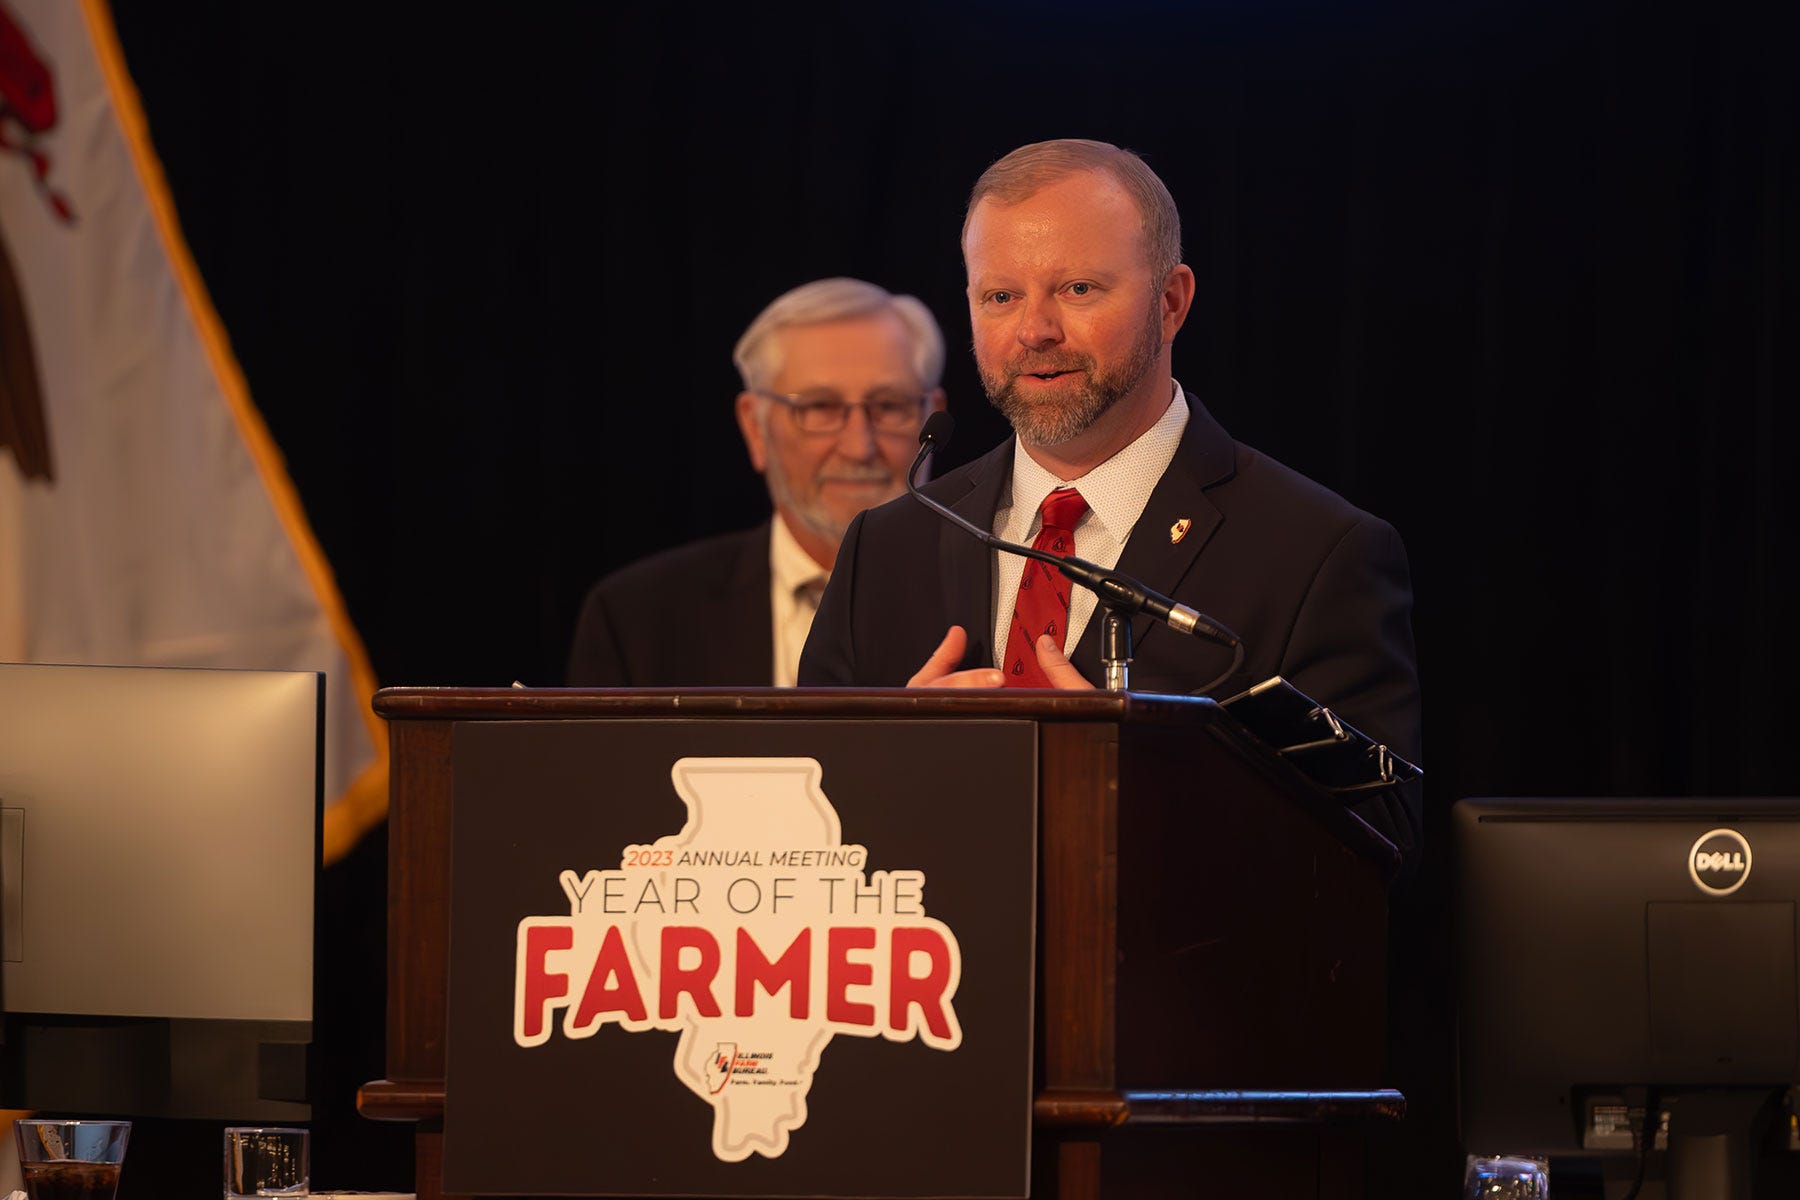 Evan Hultine, the 2023 Illinois Farm Bureau vice president, speaking into a microphone as he stands behind a podium